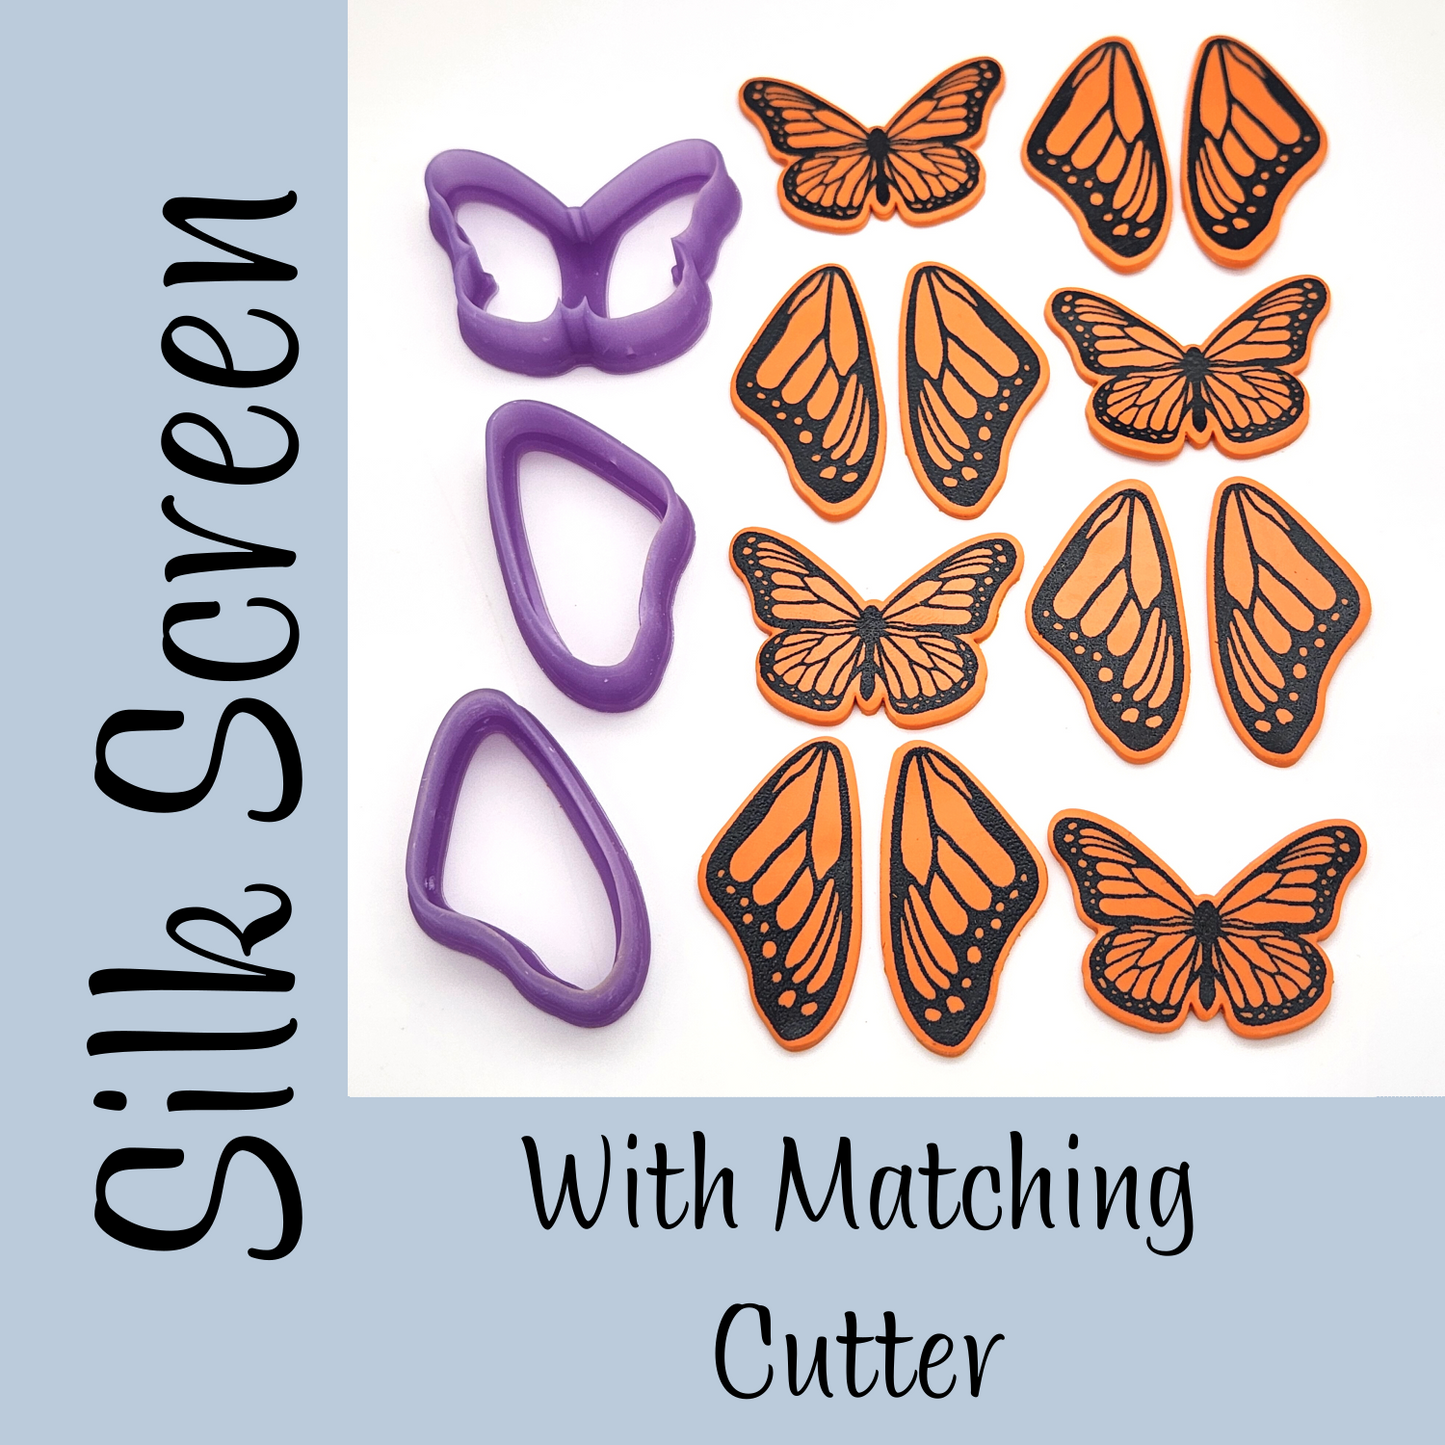 Monarch butterfly design for polymer clay using Silk screen with matching cutters set